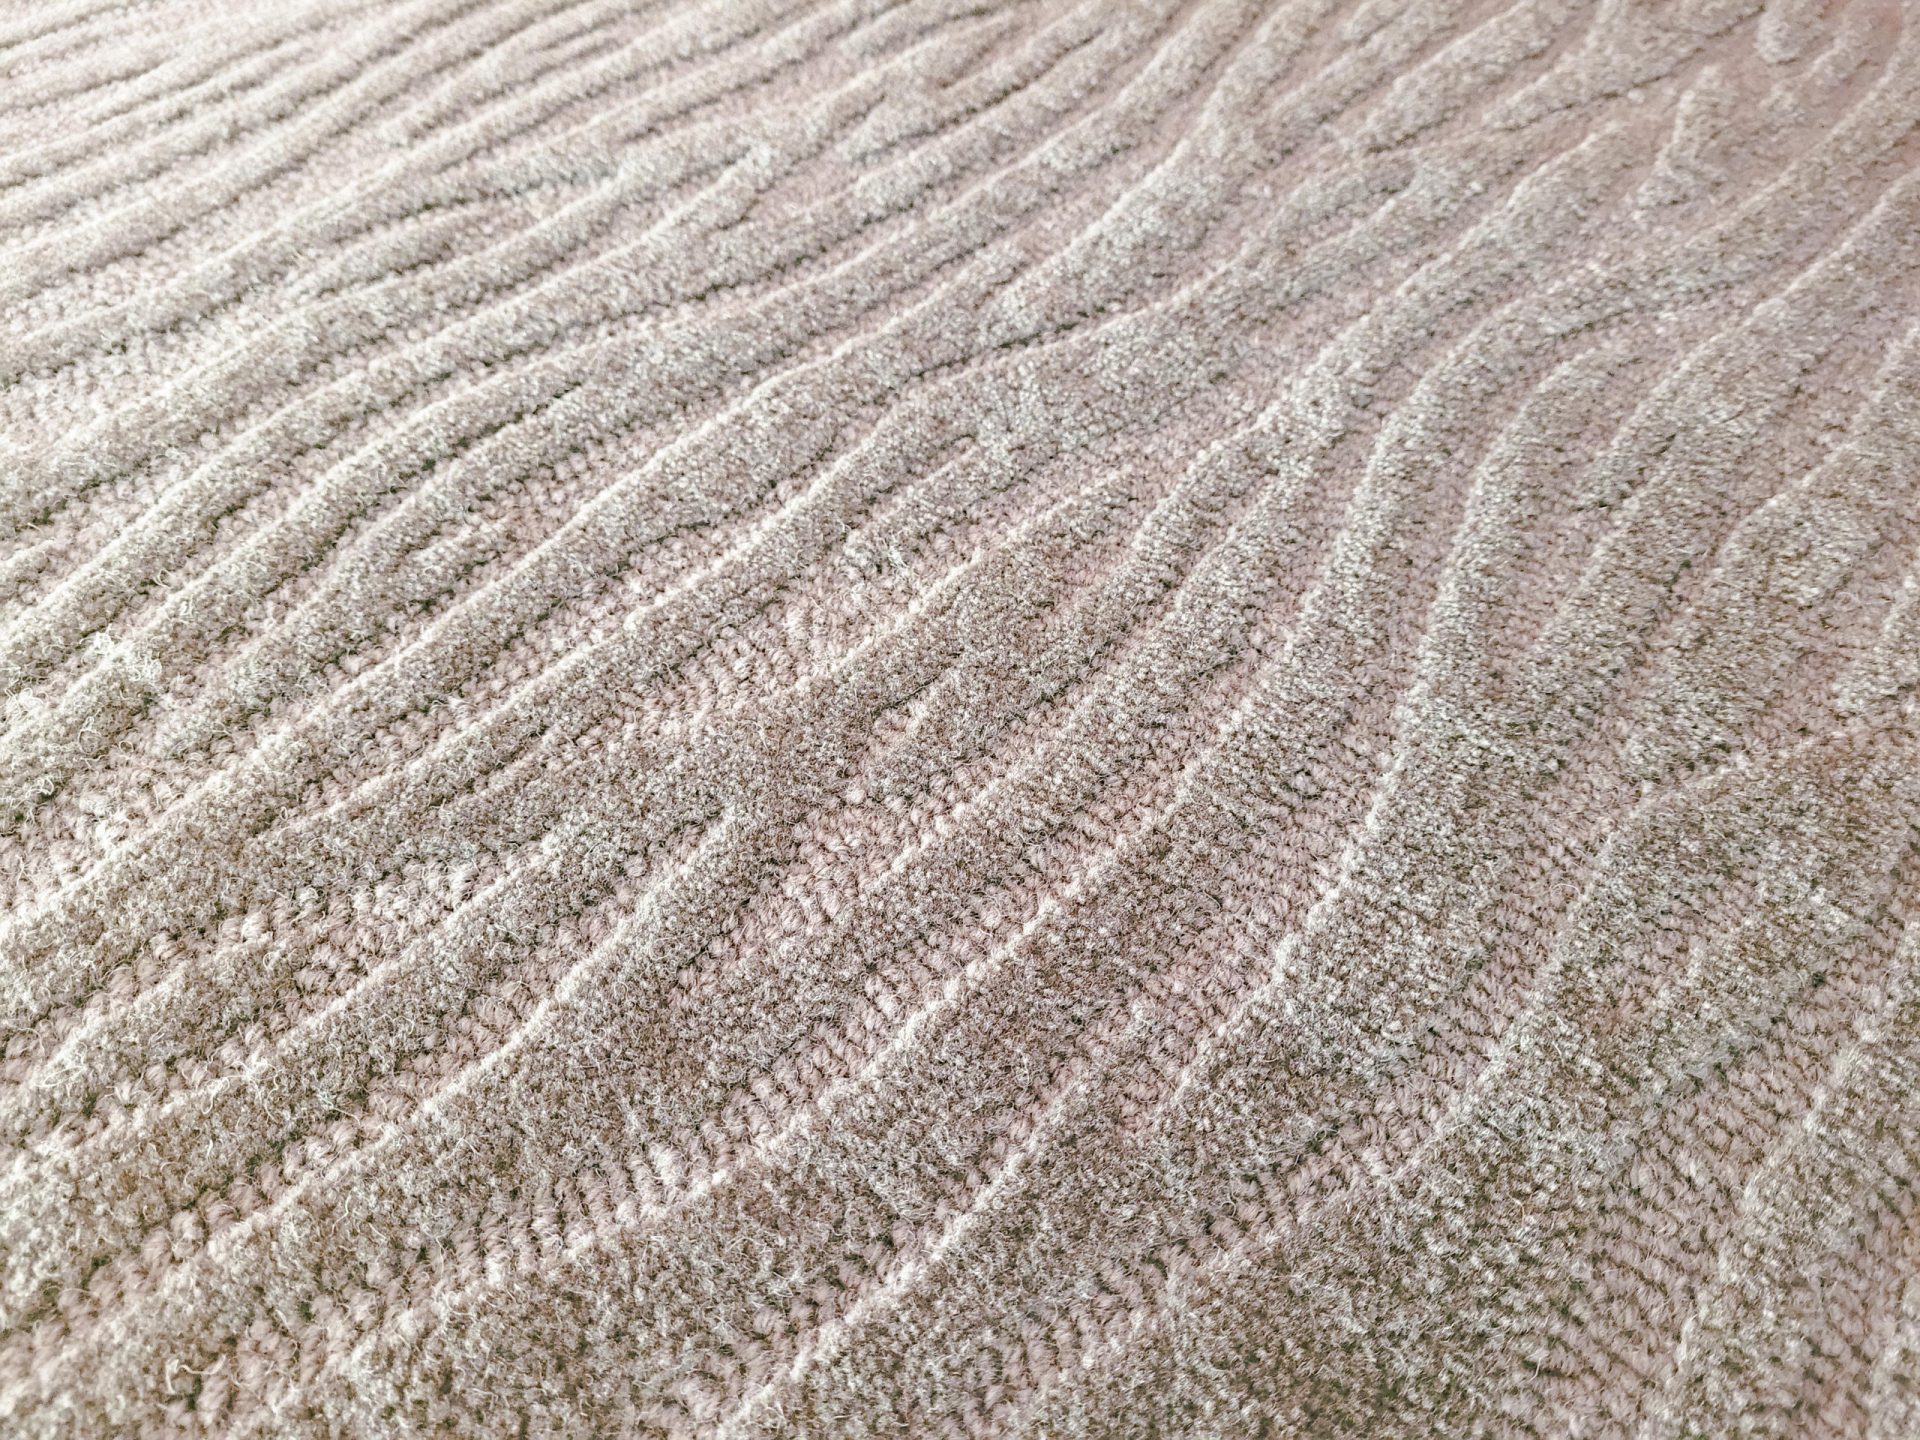 A textured rug by Artisan Rugs Perth